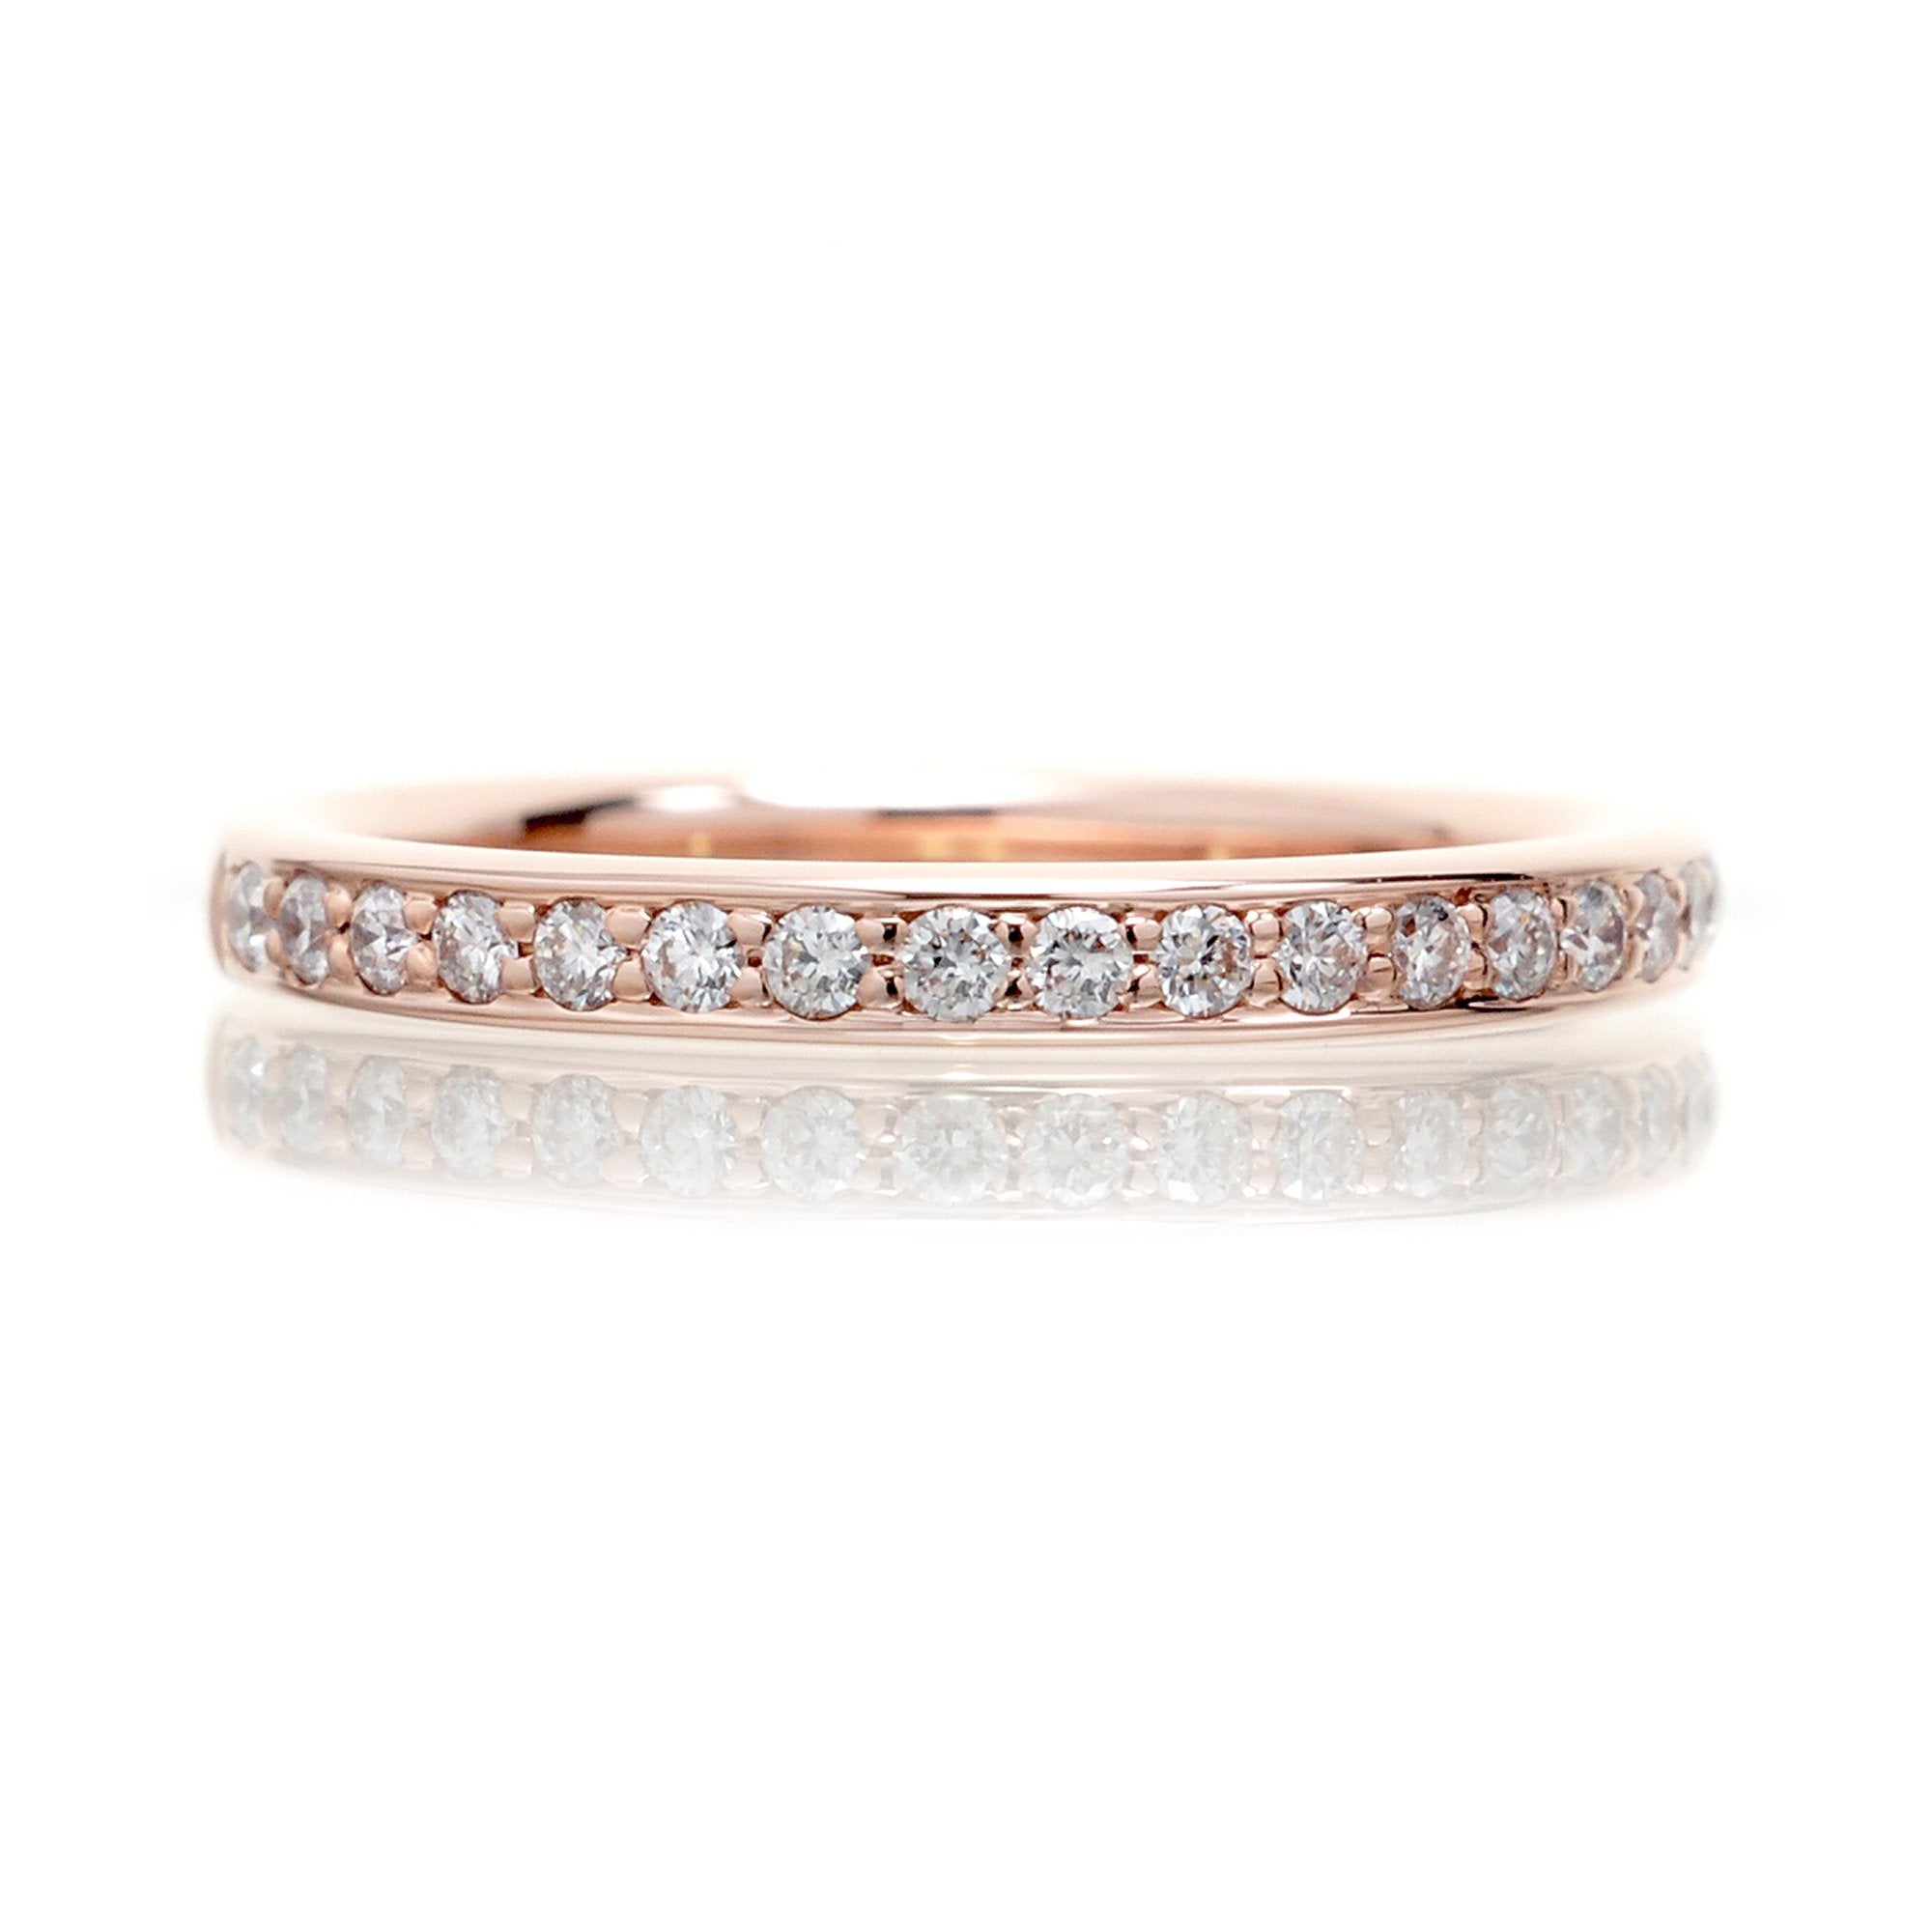 The Emily diamond wedding band in rose gold